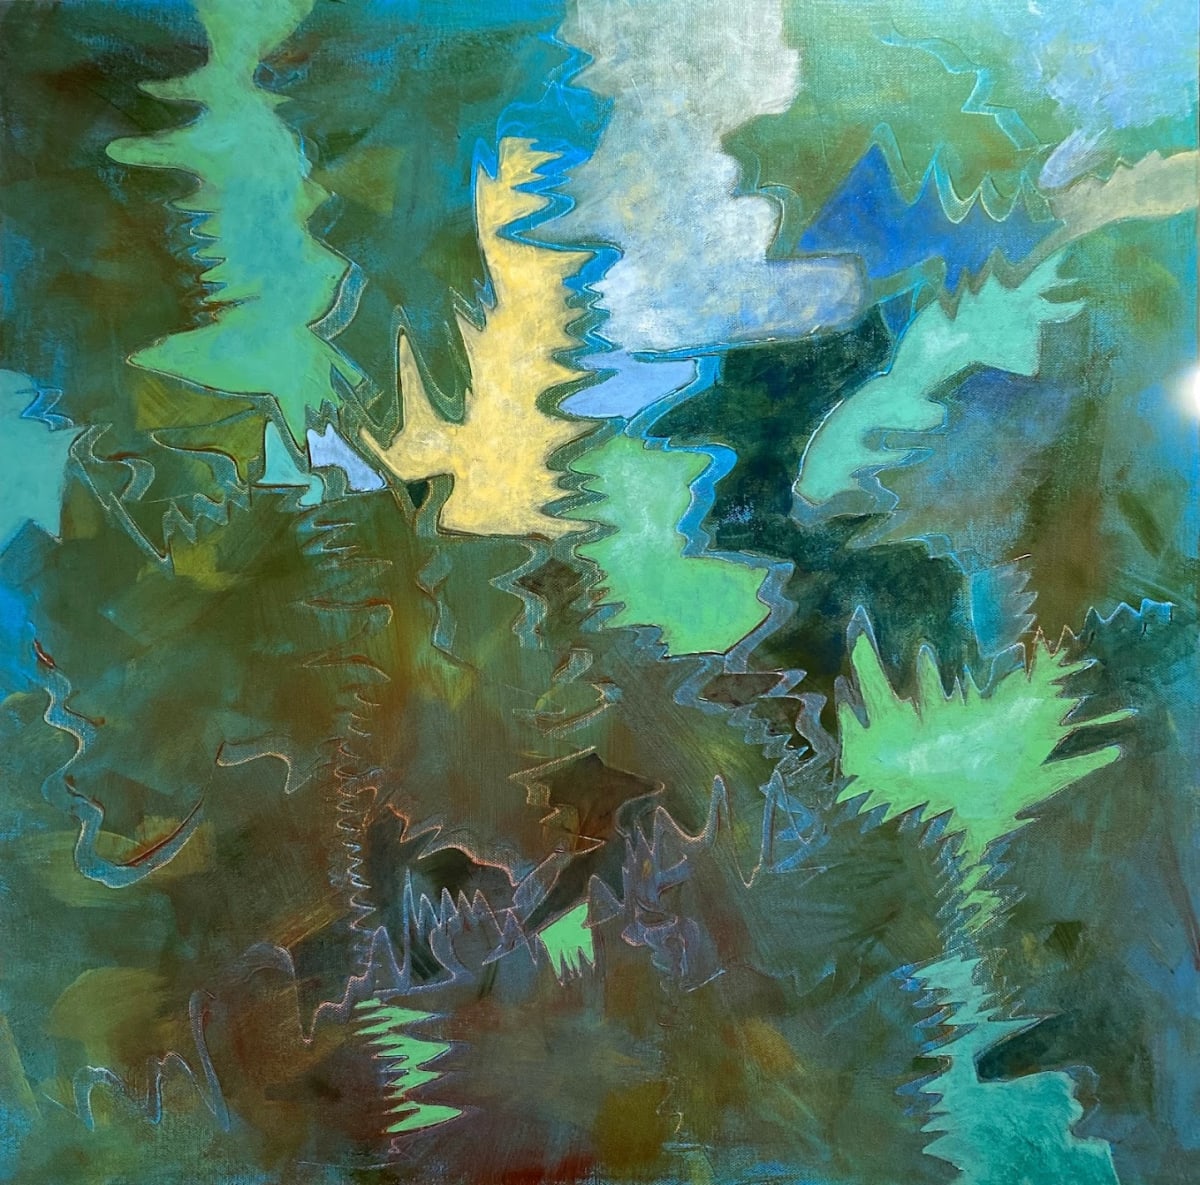 "Spring", 2021 by Darcy Johnson  Image: "Spring", Deep Forest Series, 2021